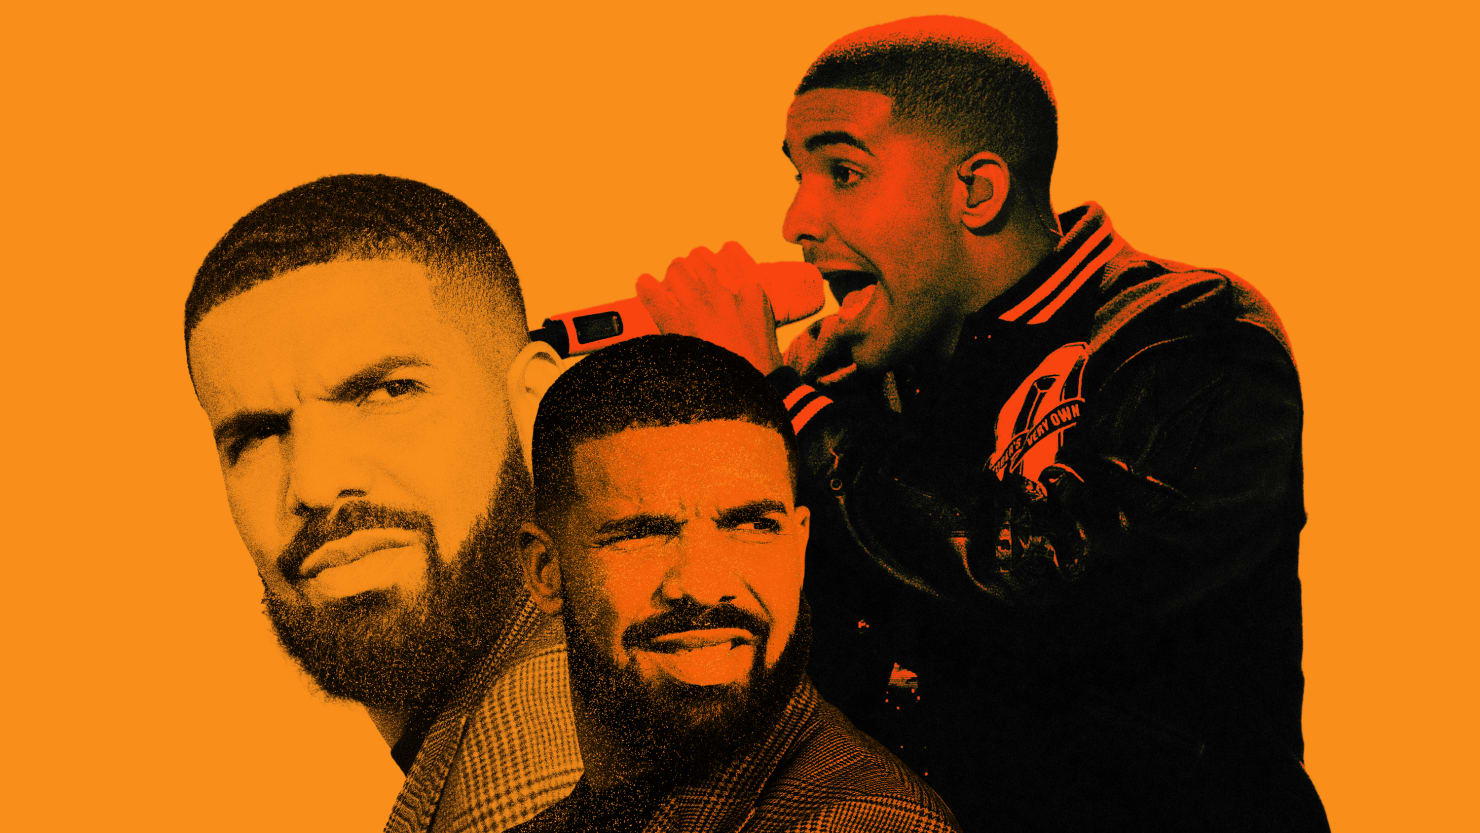 New Drake Album 'Honestly, Nevermind' Is Proof He's Way Past His Prime - The Daily Beast